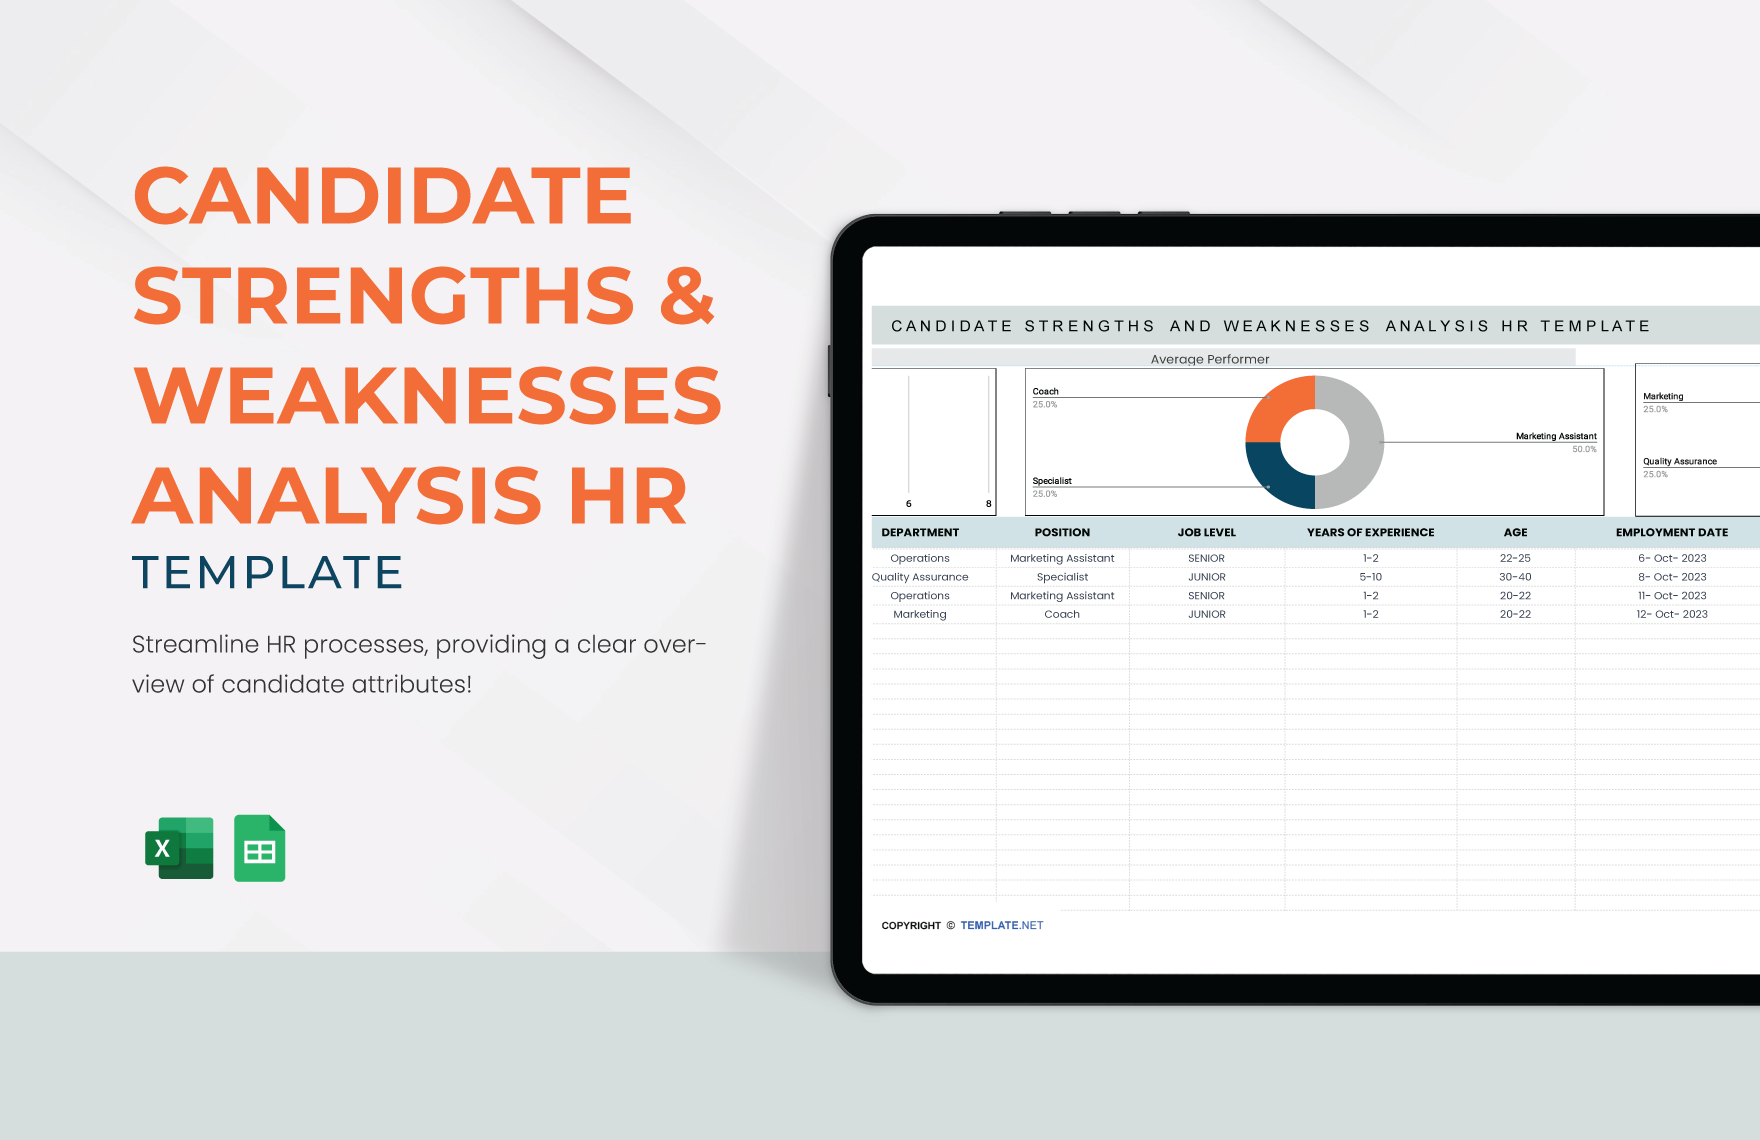 Candidate Strengths and Weaknesses Analysis HR Template